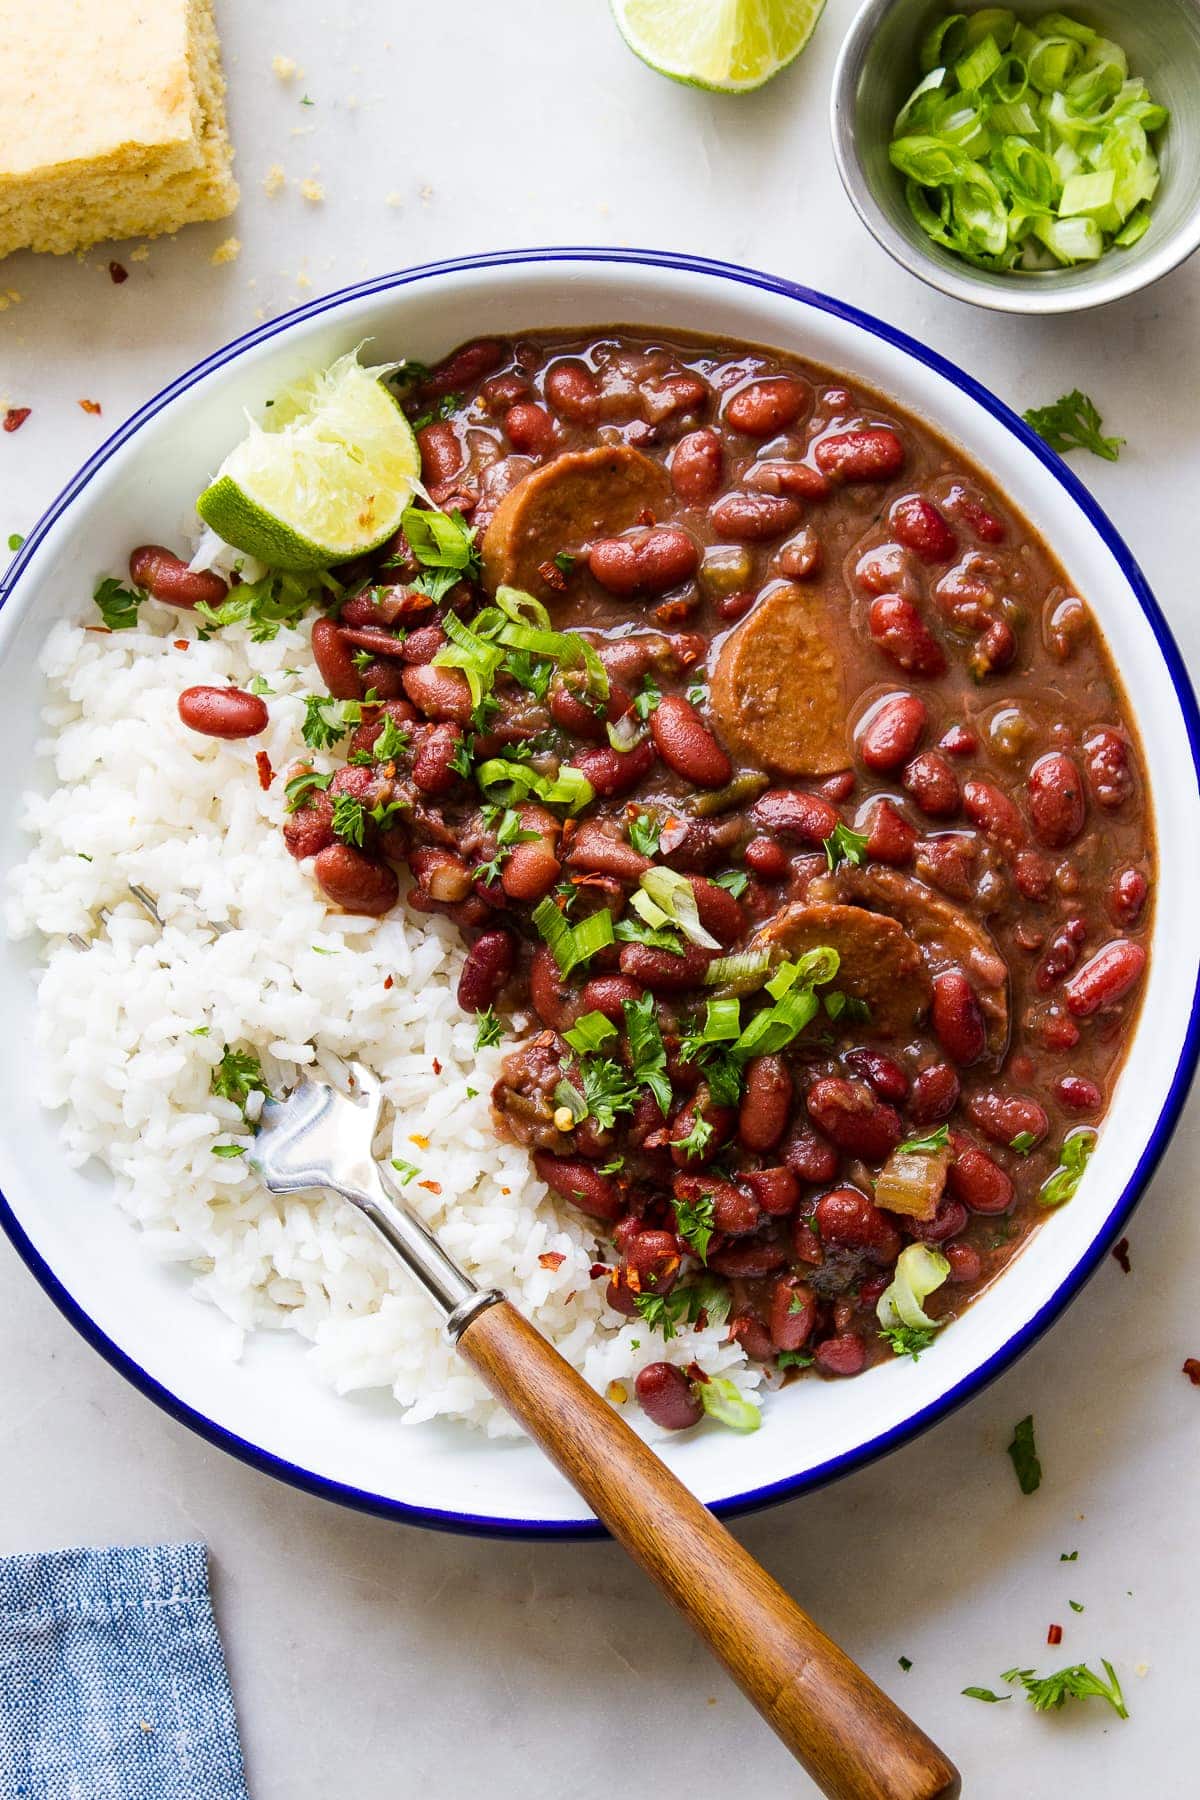 top down view of a white bowl with blue rim filled with a serving of vegan red beans and rice.